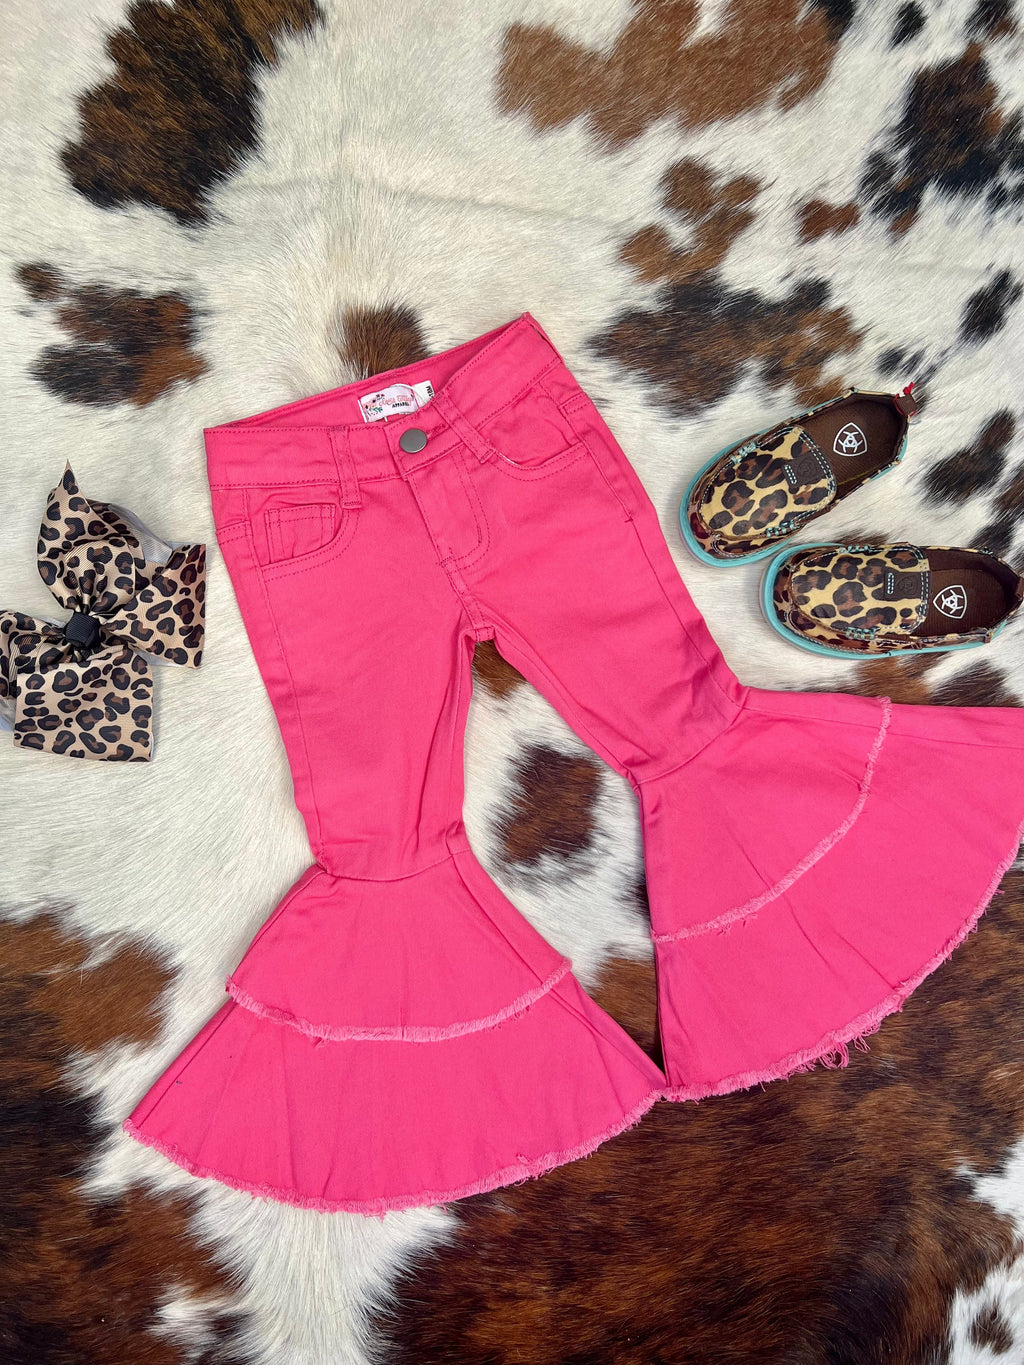 Your The Little Lainey's Pink Bells will be rocking the trendiest jeans around with these cool bell bottoms! With a pink wash and western-style silhouette, these pink fab bell bottoms will have them looking hip and stylish. The double tiered hem gives a unique touch, ensuring their look stands out from the crowd. Time to up their fashion game!